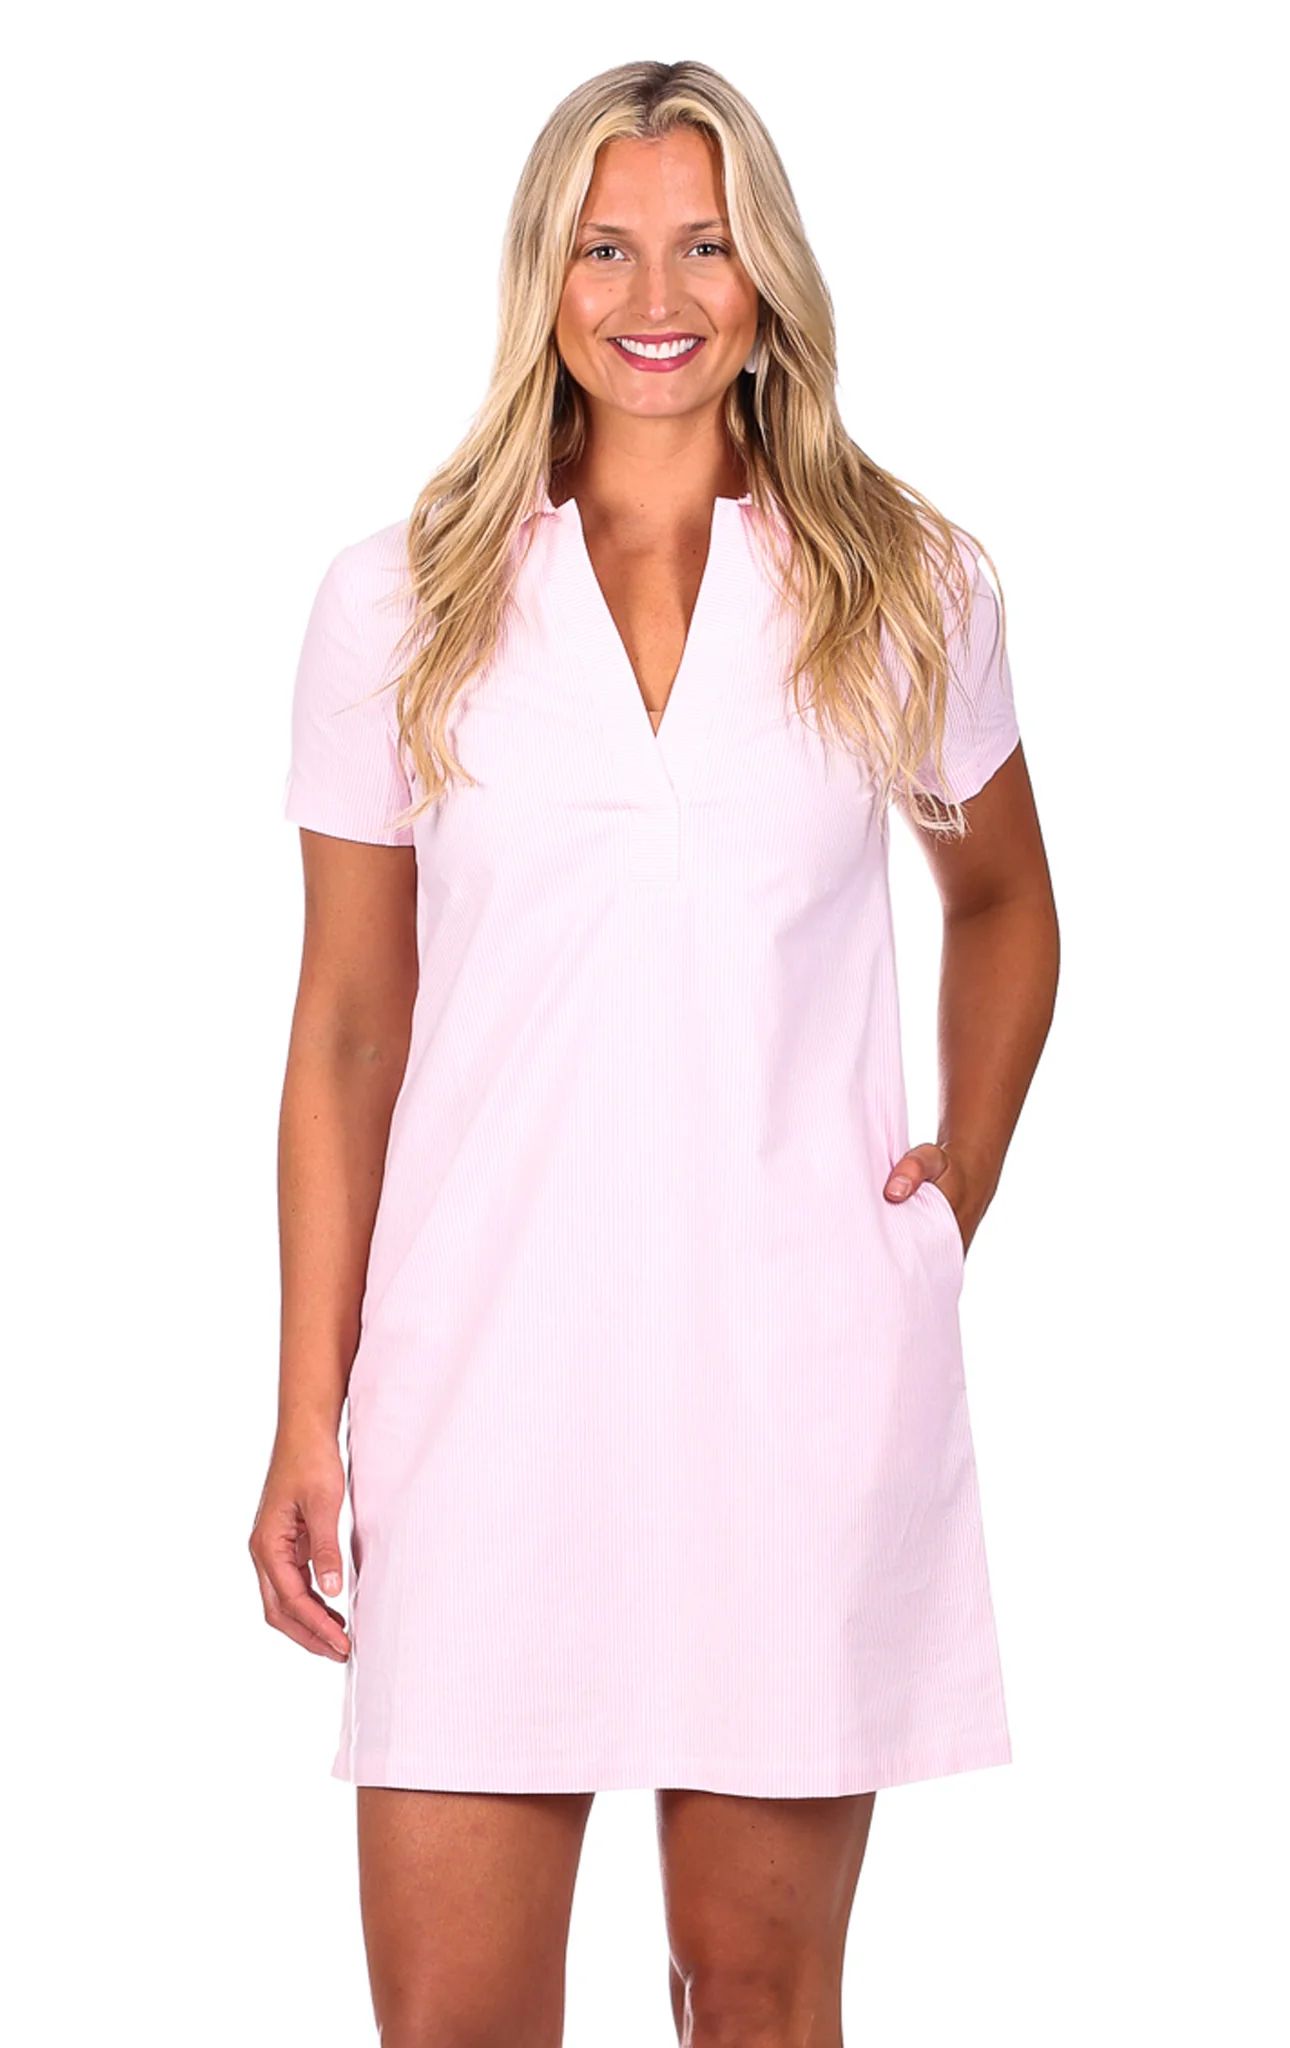 Asher Dress in Pink Oxford | Duffield Lane